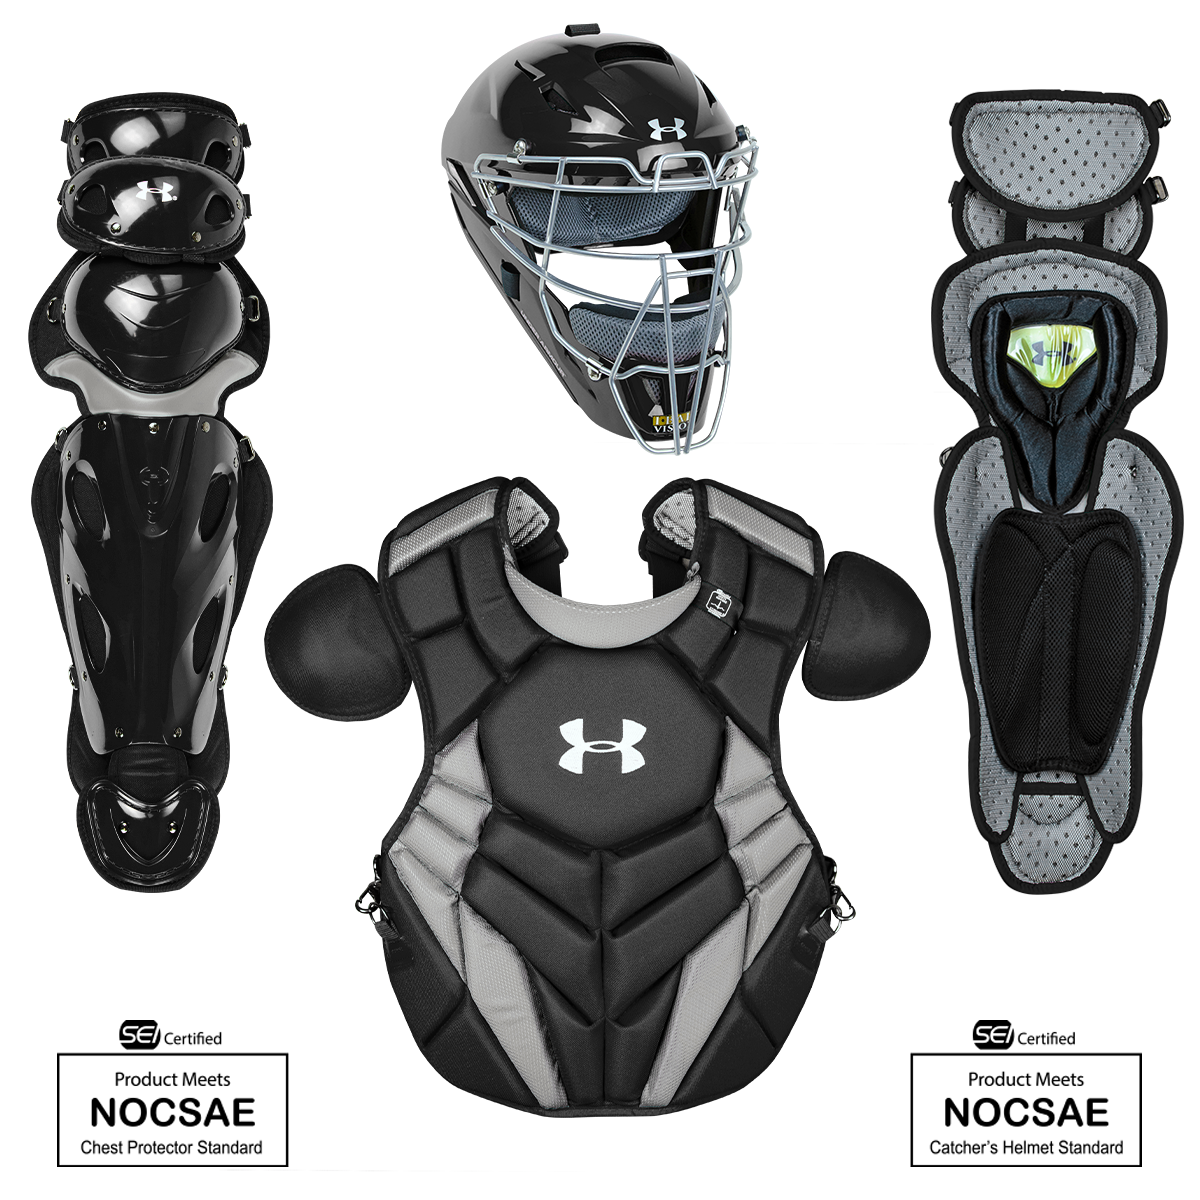 Under Armour SR Pro 4 Series Catching Kit (12-16 Year Old)